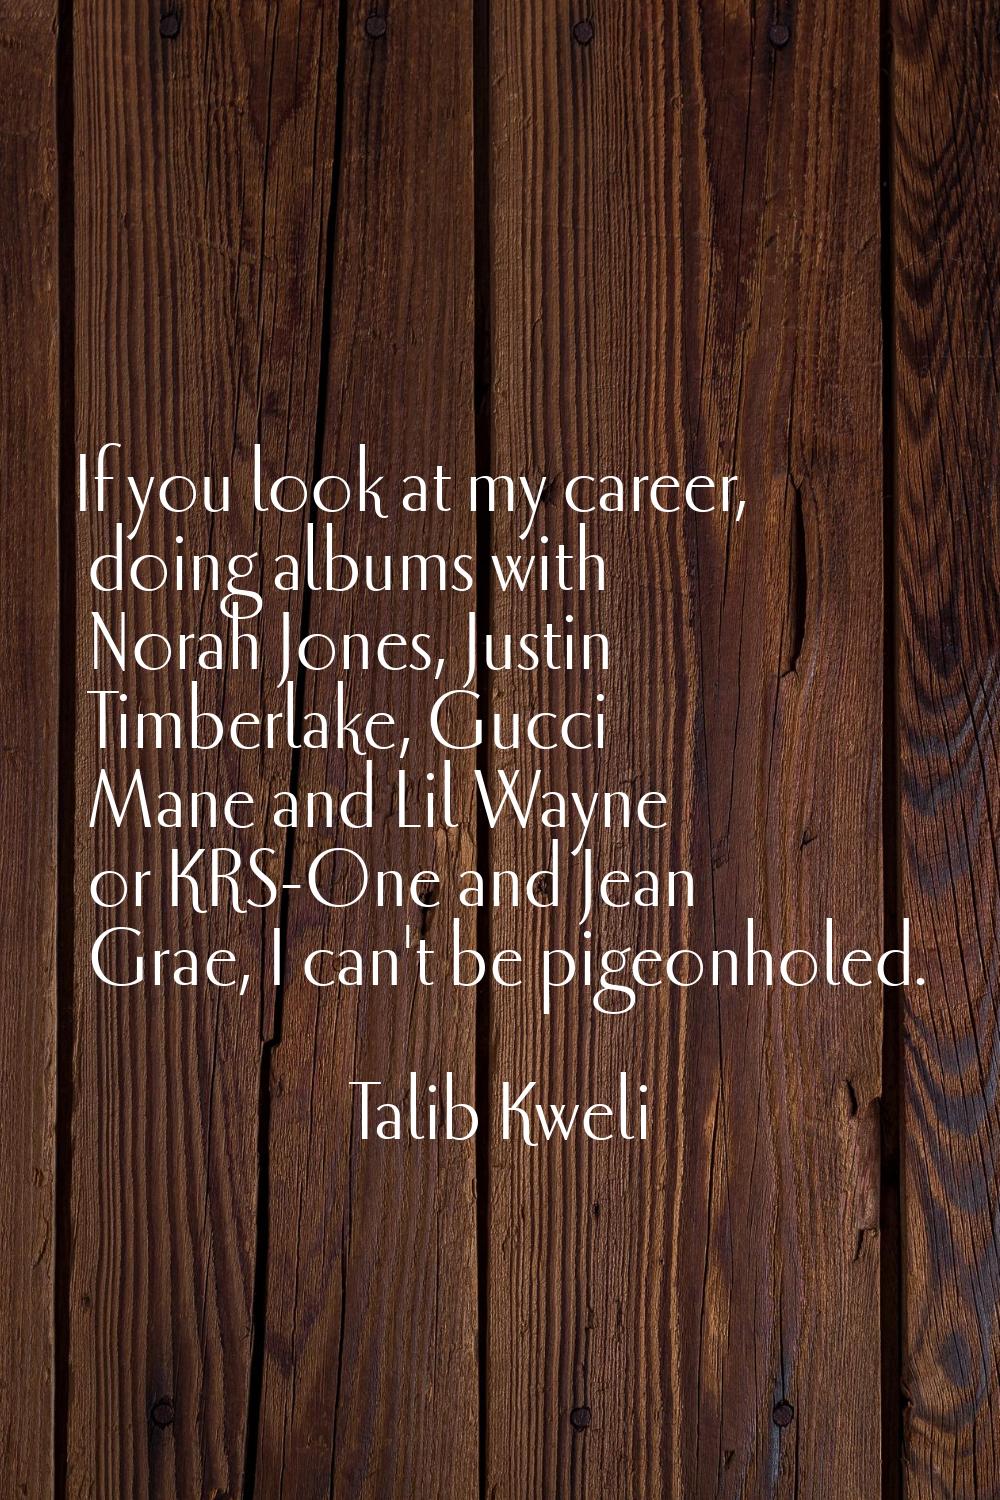 If you look at my career, doing albums with Norah Jones, Justin Timberlake, Gucci Mane and Lil Wayn